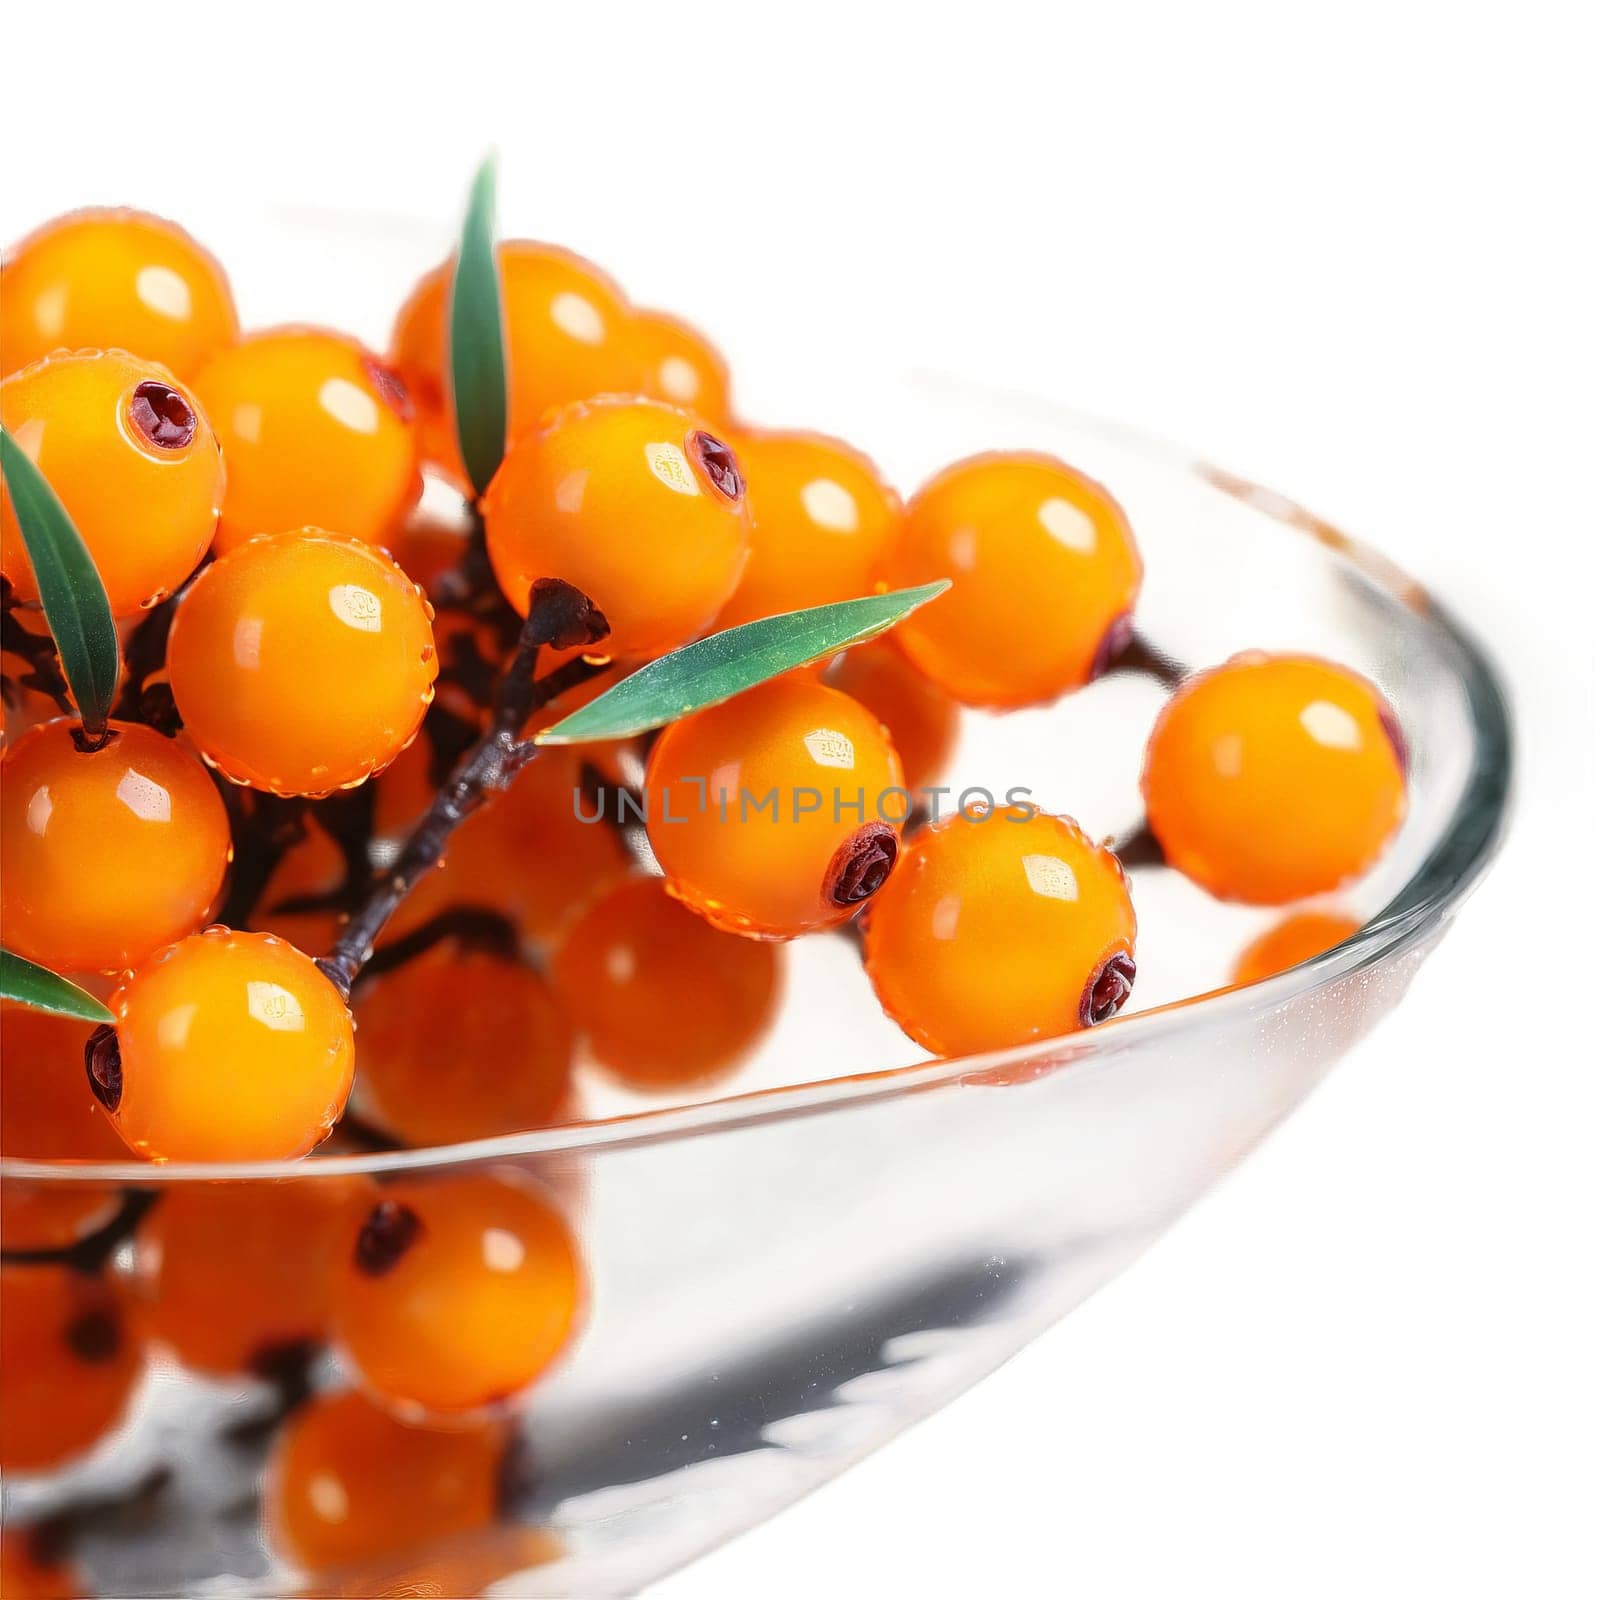 Plump sea buckthorn berries Hippophae rhamnoides gathered in a clear glass bowl their orange glow by panophotograph